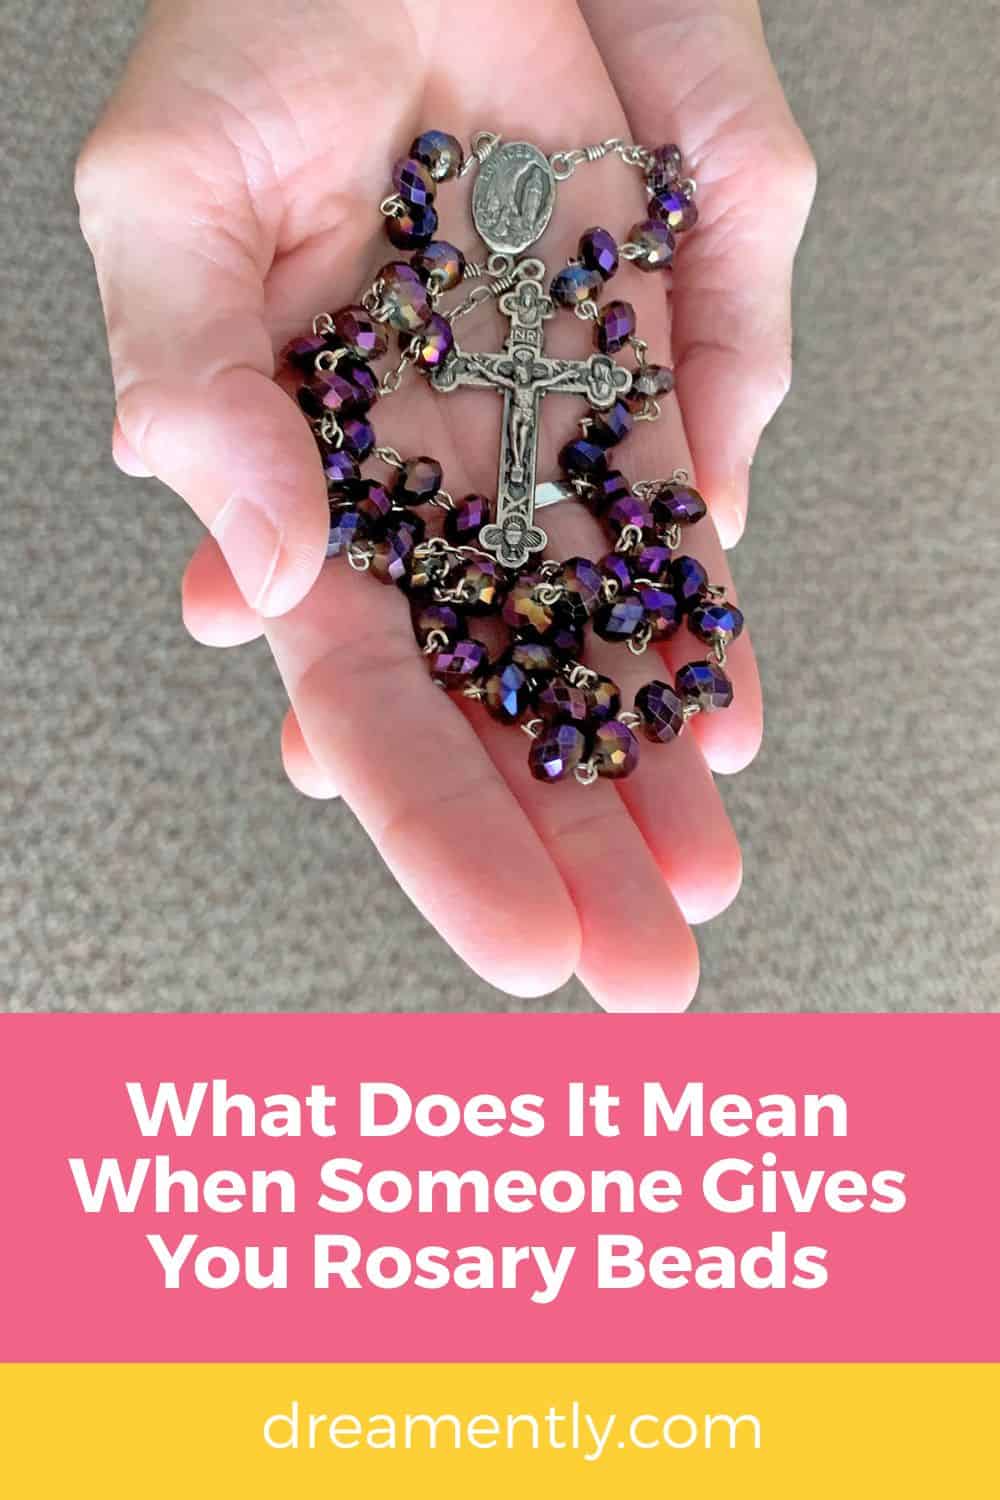 What Does It Mean When Someone Gives You Rosary Beads